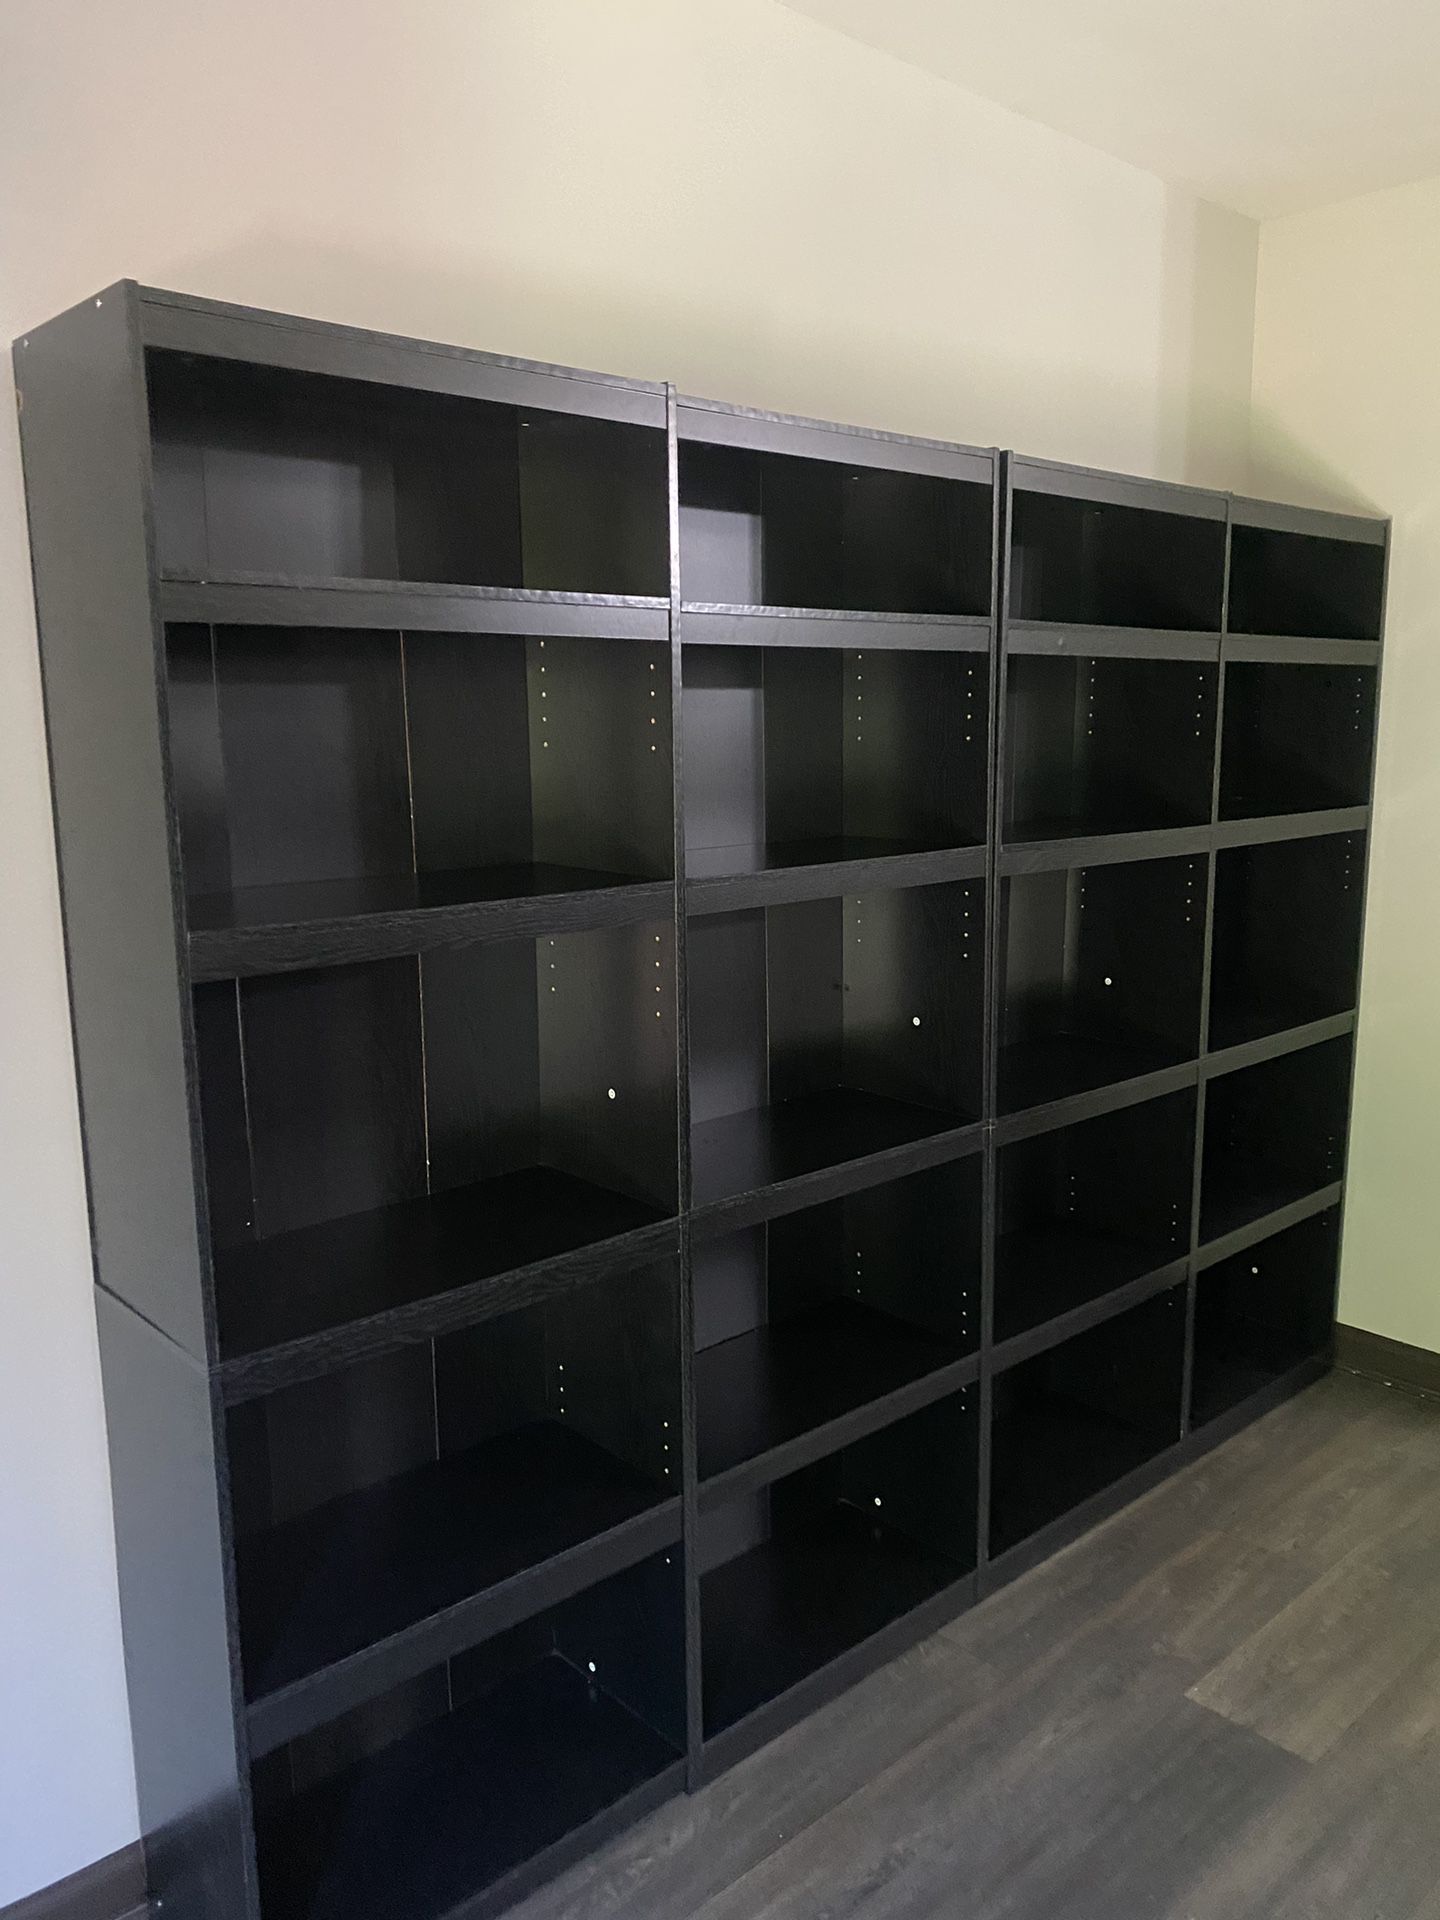 4 Shelves For Sale- Perfect 5-tier Organizer For Homes, Business, Boutique, Schools & More